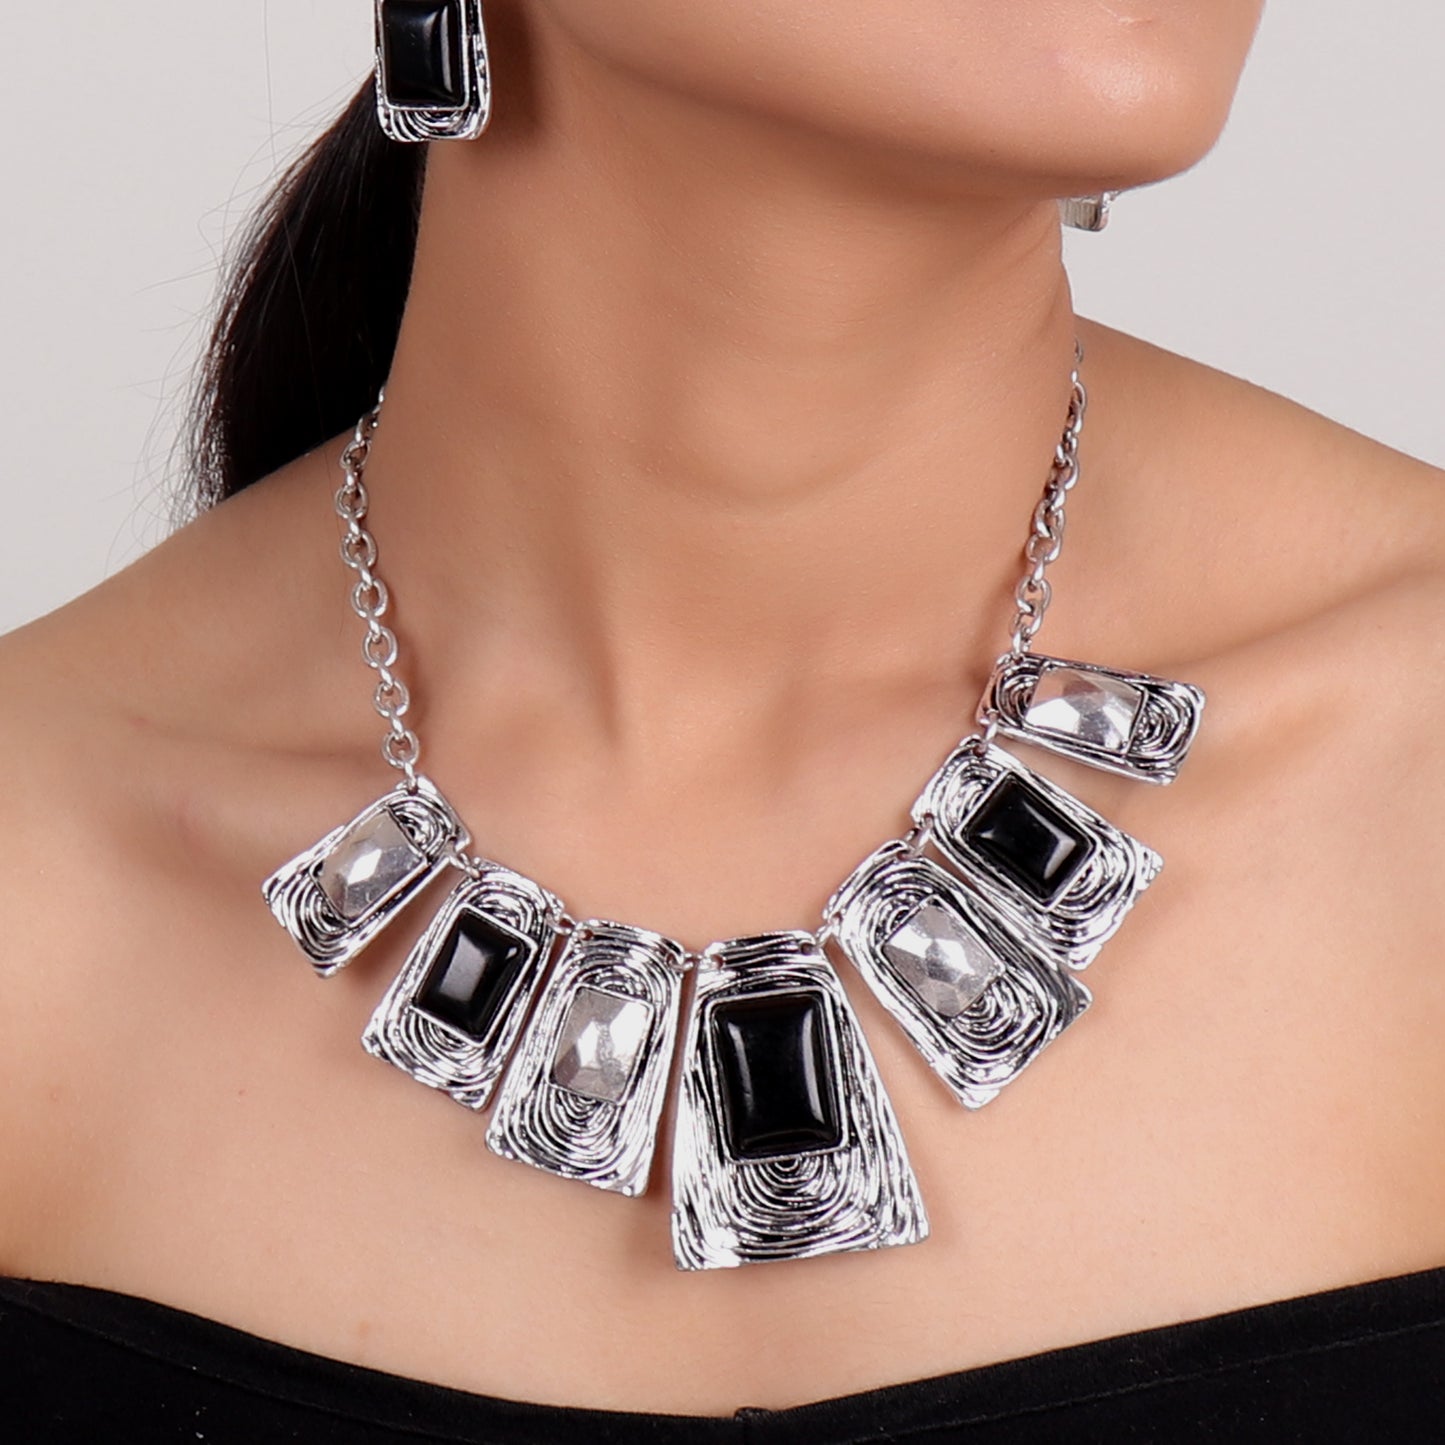 Necklace Set,High Fashion Metal Necklace Set in Black - Cippele Multi Store